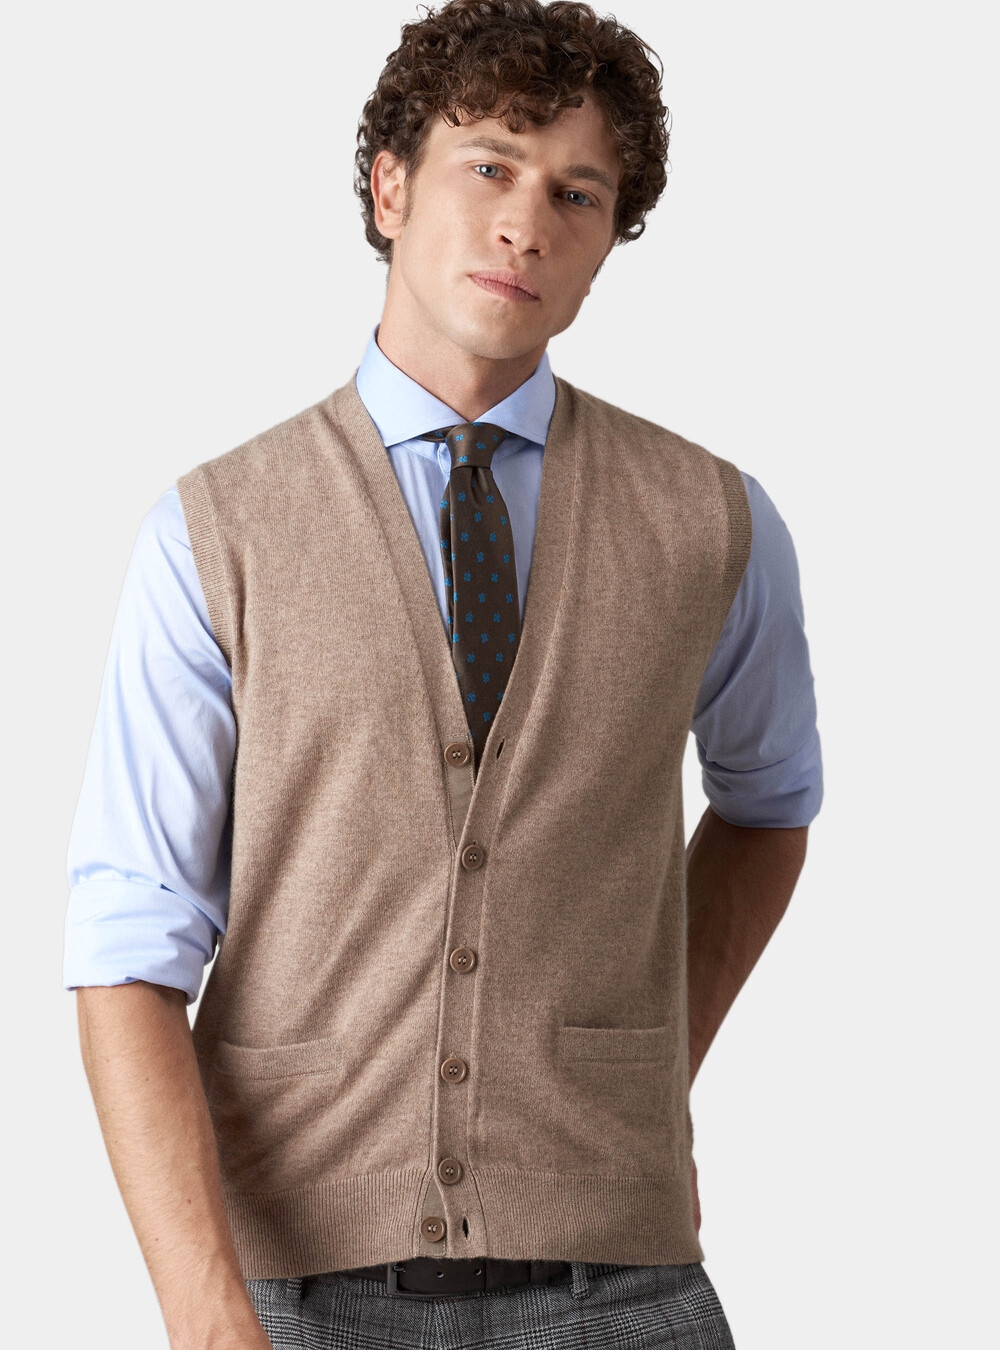 100% cashmere knitted vest with buttons | GutteridgeUS | Cashmere Selection  Uomo